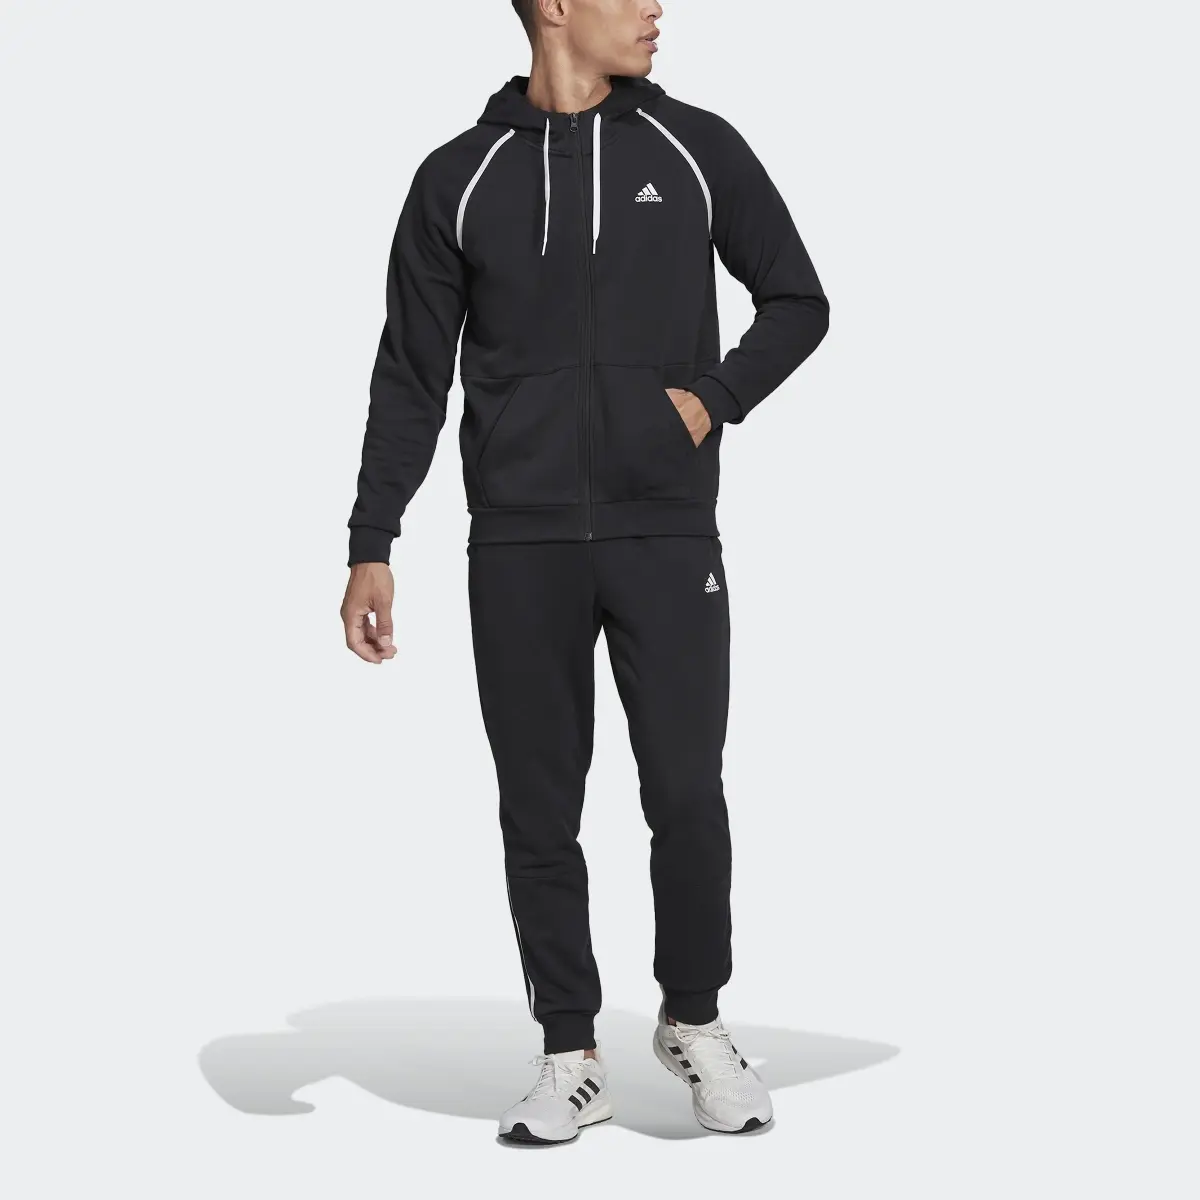 Adidas Cotton Piping Track Suit. 1